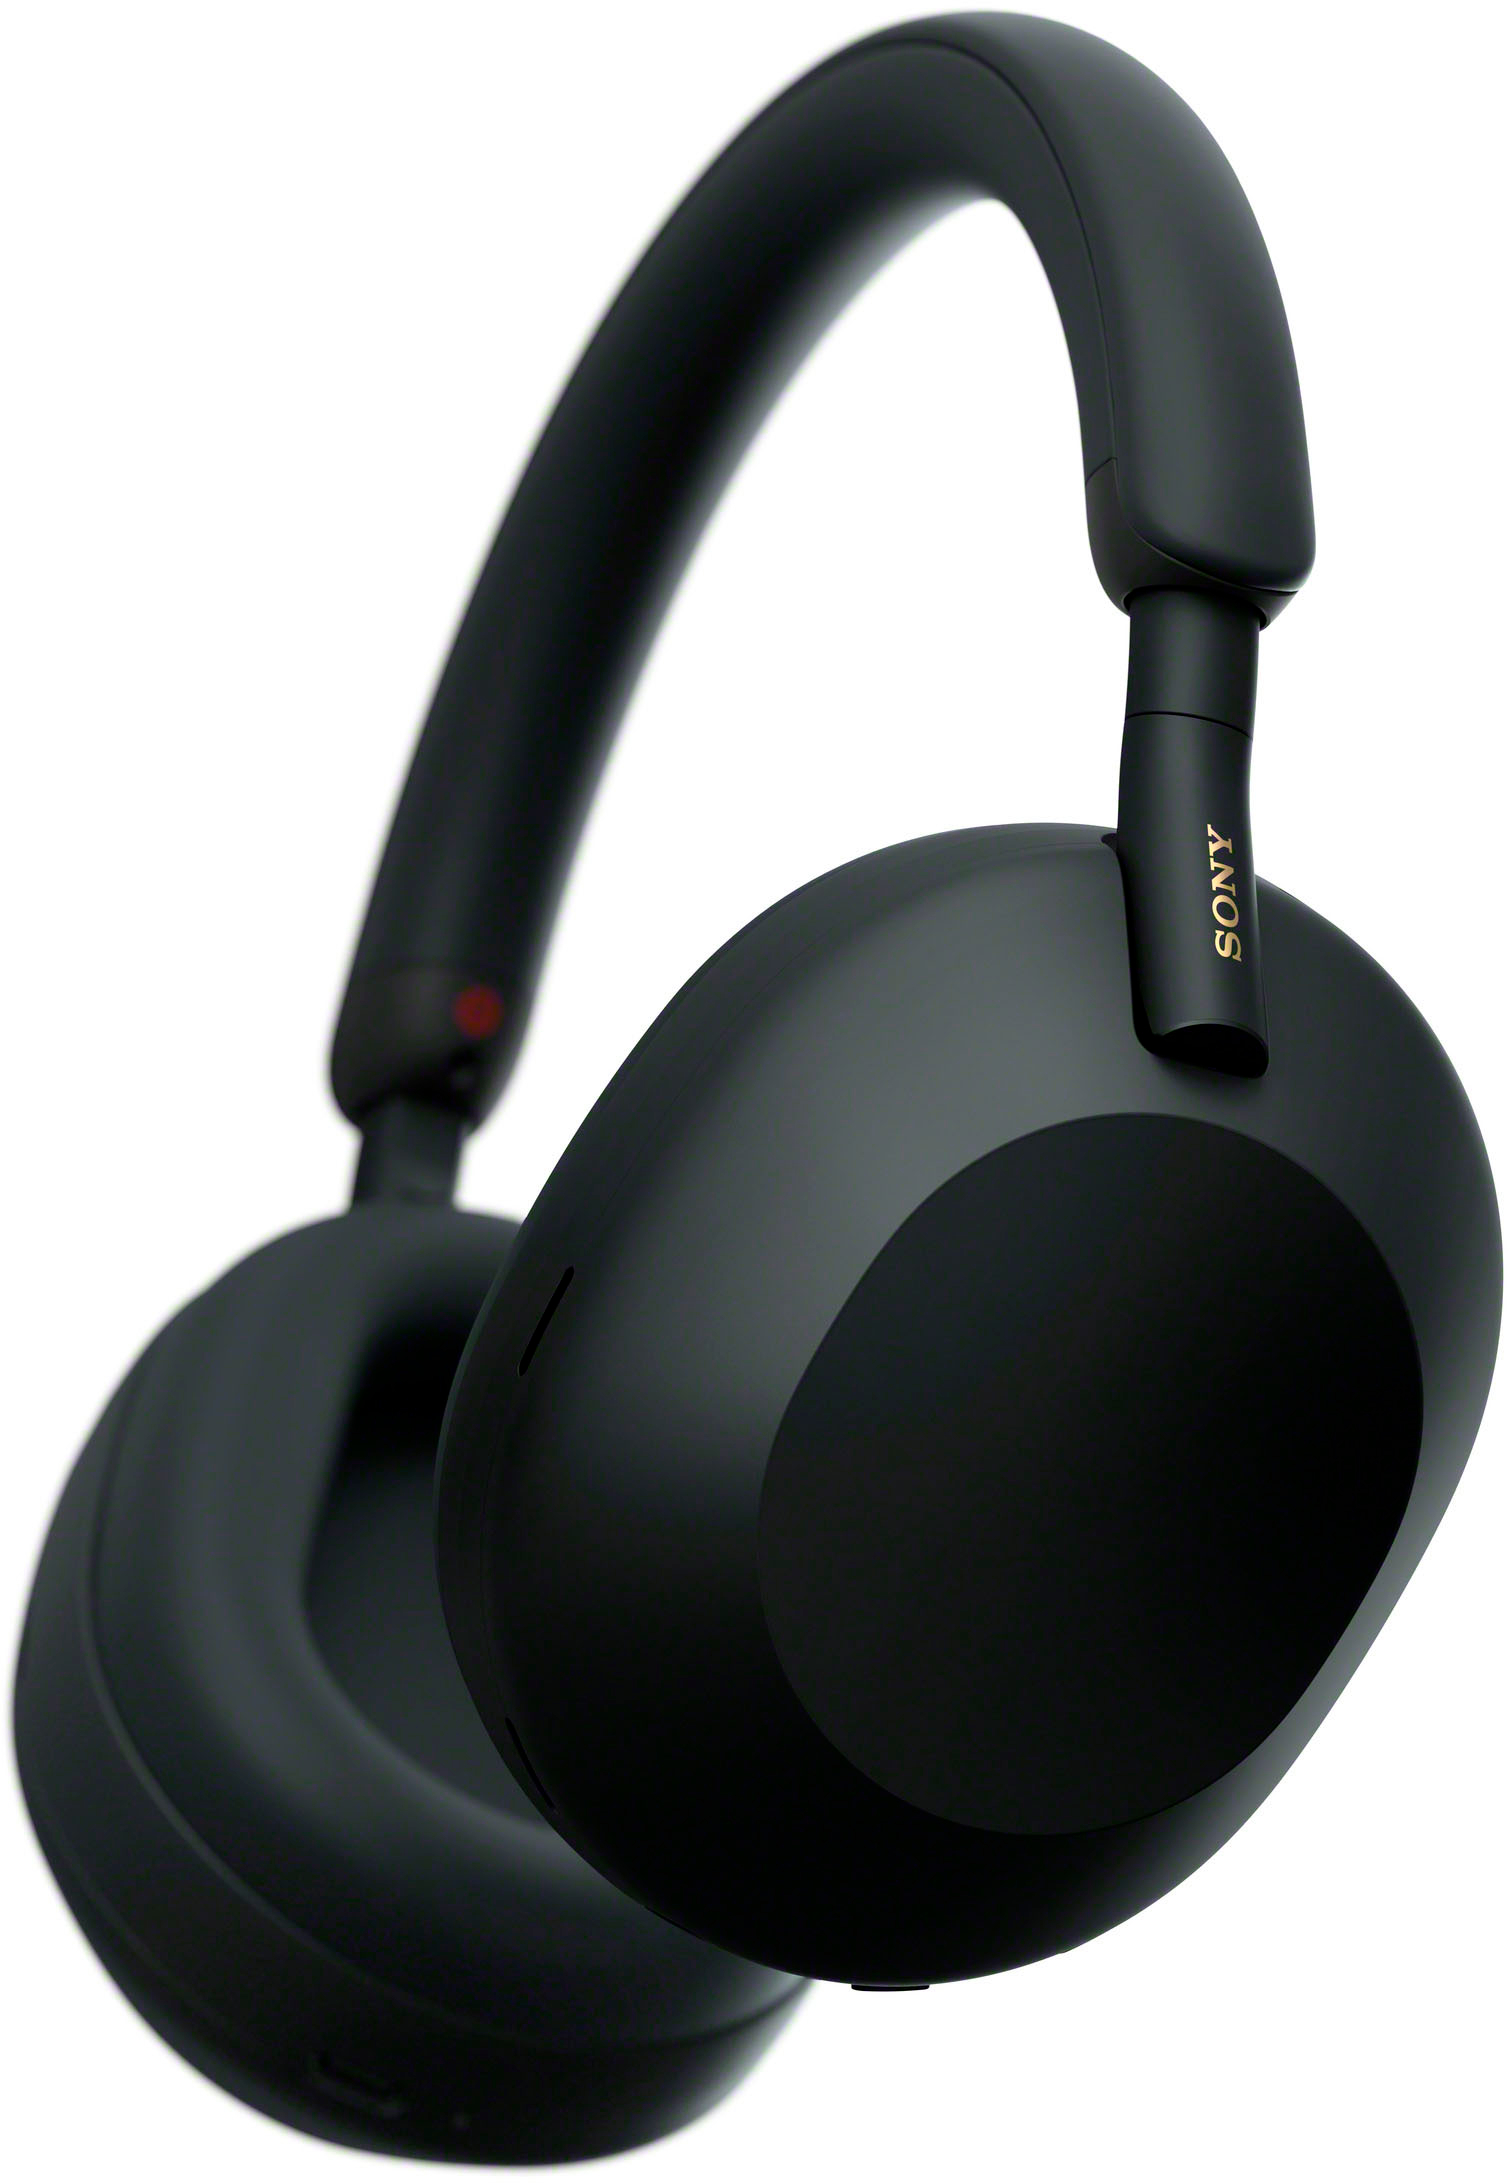 Sony WH1000XM5 Wireless Noise-Canceling Over-the-Ear Headphones Black  WH1000XM5/B Best Buy